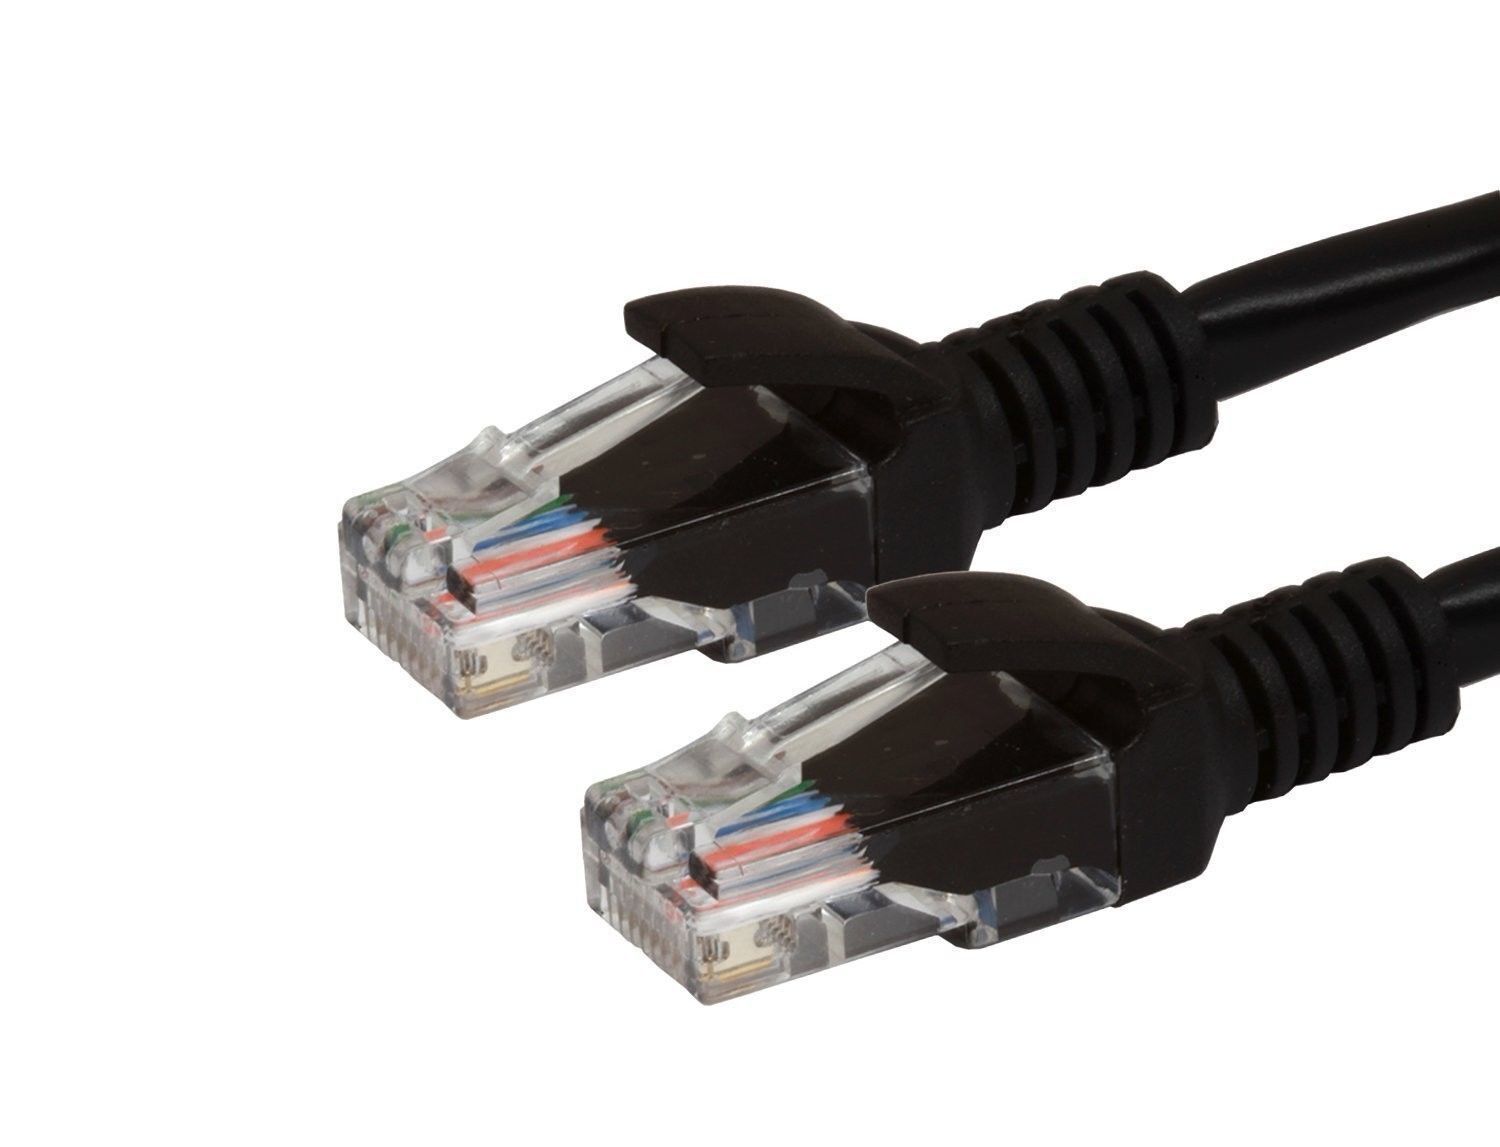 BLOWOUT SALE 100 Ethernet Patch Cable, 3ft or 6ft, Network Cable LAN